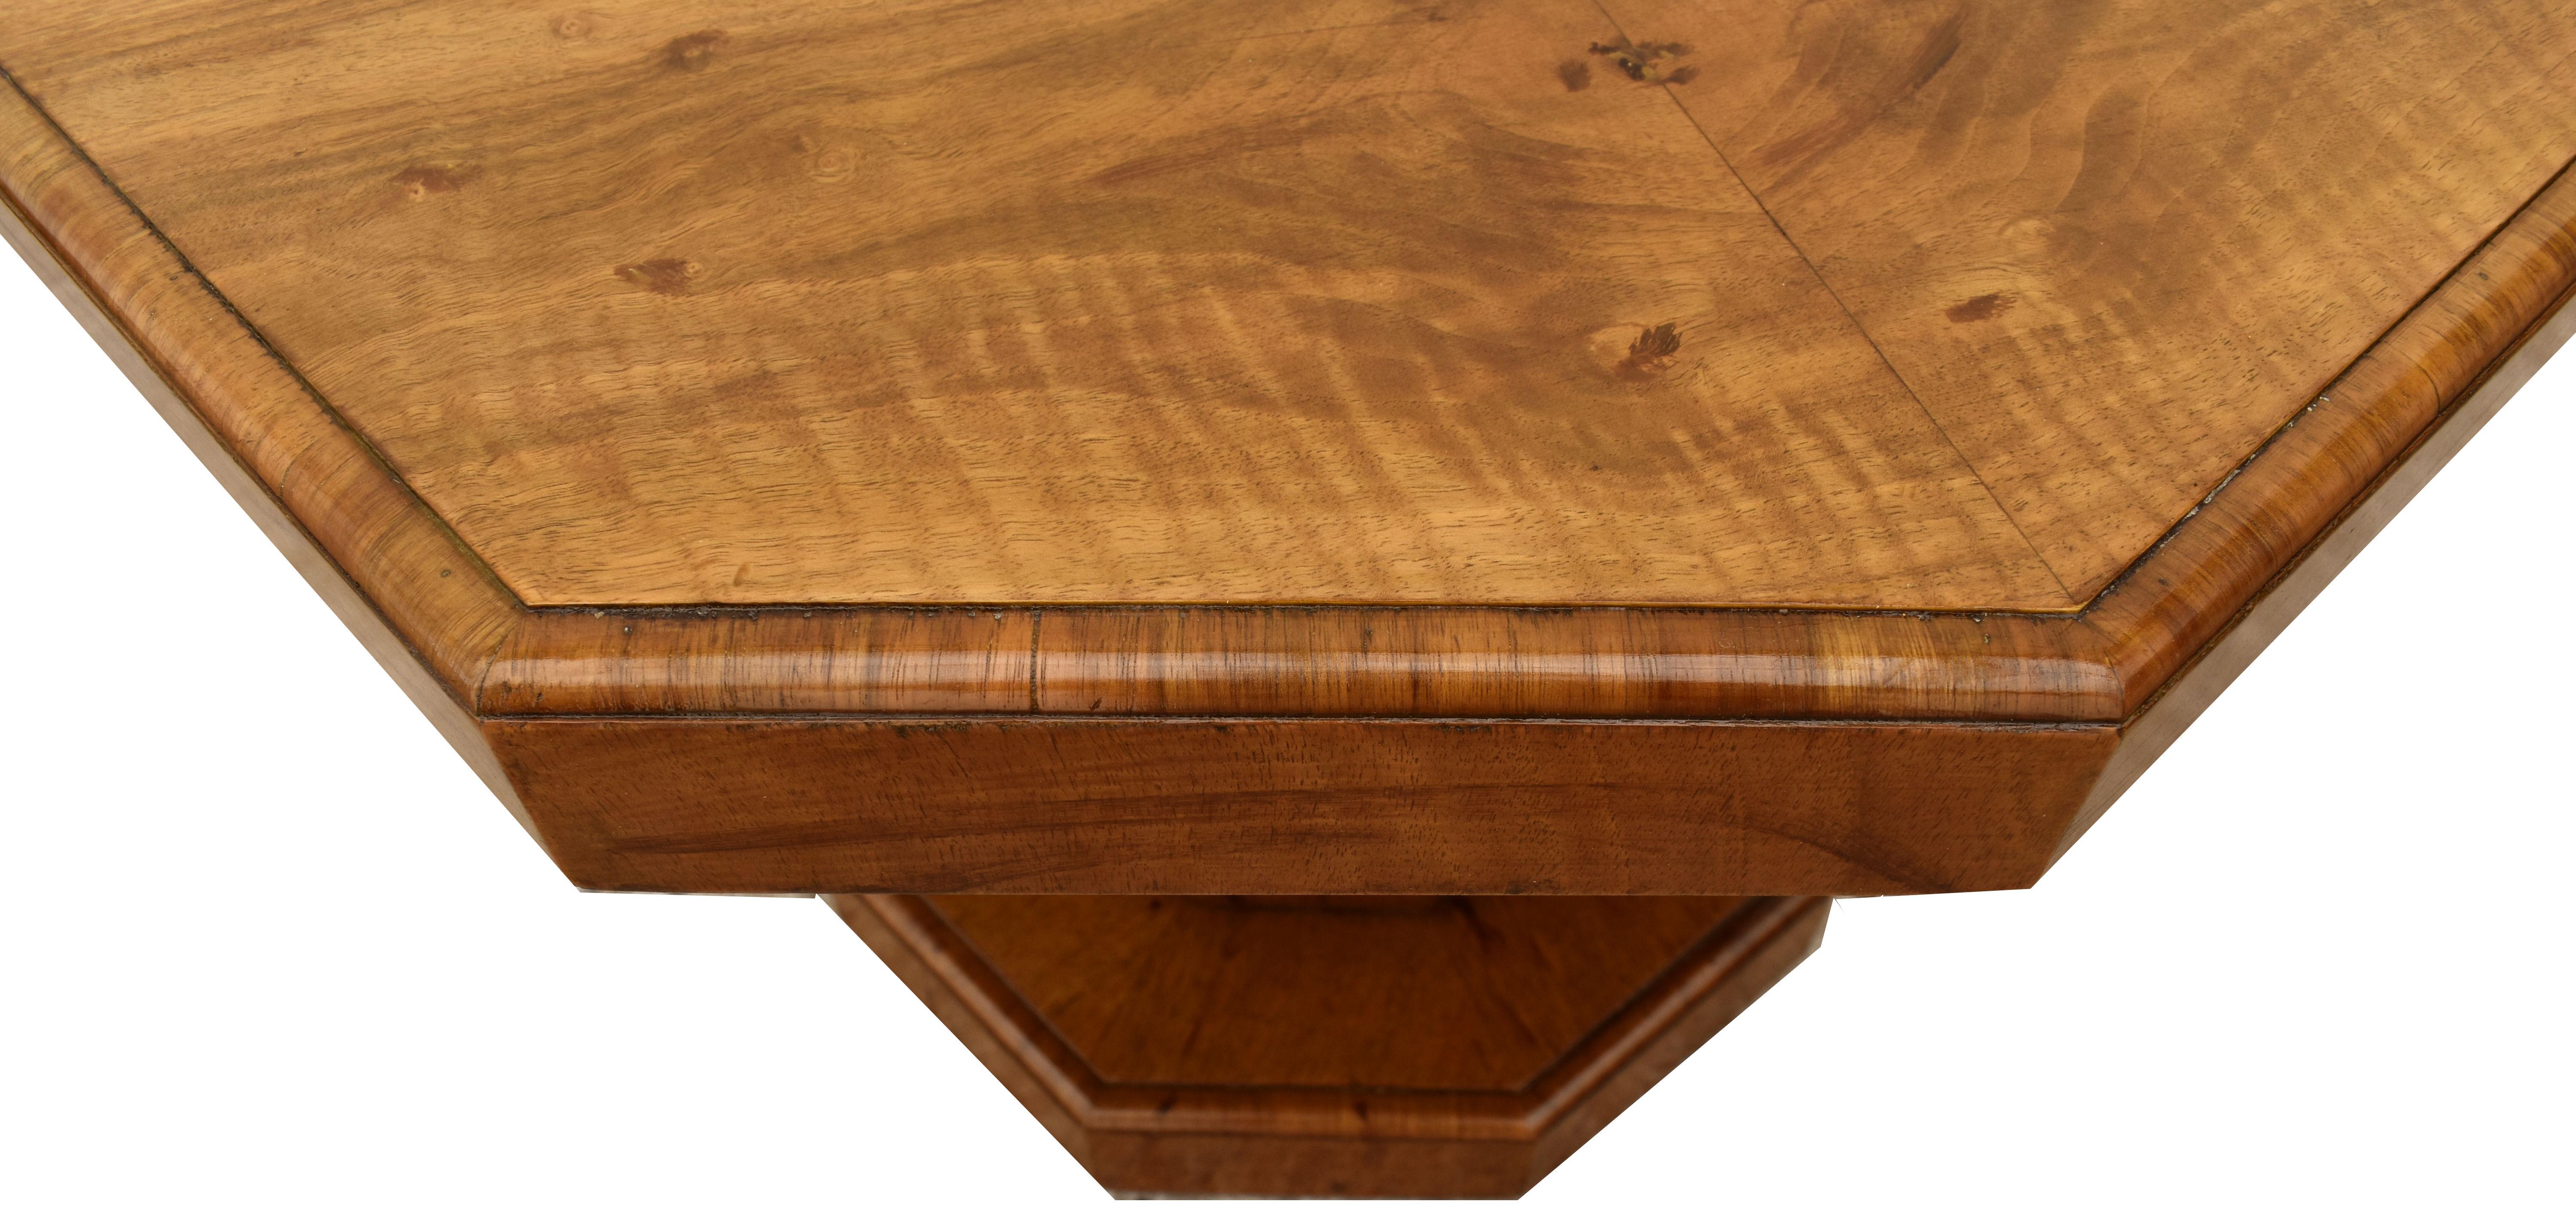 Art Deco Walnut Occasional Table, English, c1930 In Good Condition For Sale In Devon, England